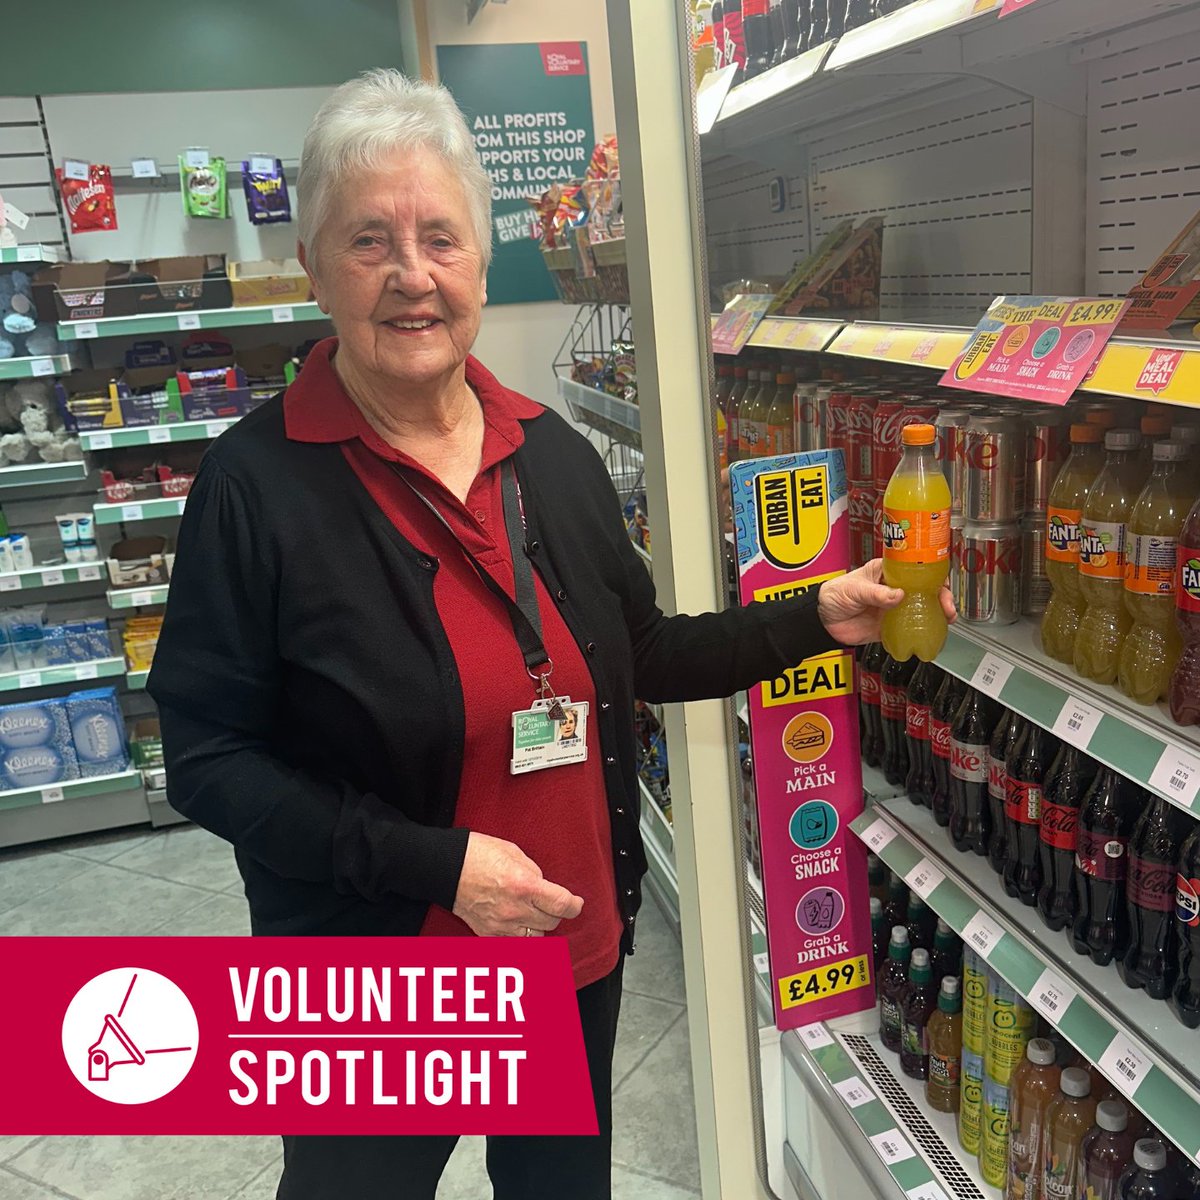 For over four decades, Pat has generously devoted her time to volunteering with us, lending a hand at our café and trolley service at James Cook University Hospital @SouthTees Read Pat’s full story here: orlo.uk/wV1mq